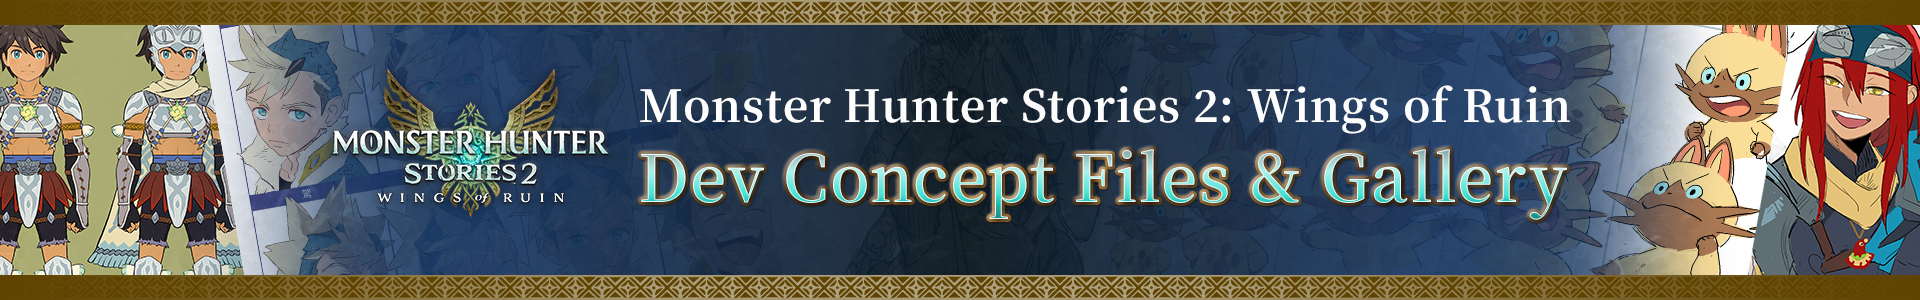 Monster Hunter Stories 2: Wings of Ruin Dev Concept Files & Gallery